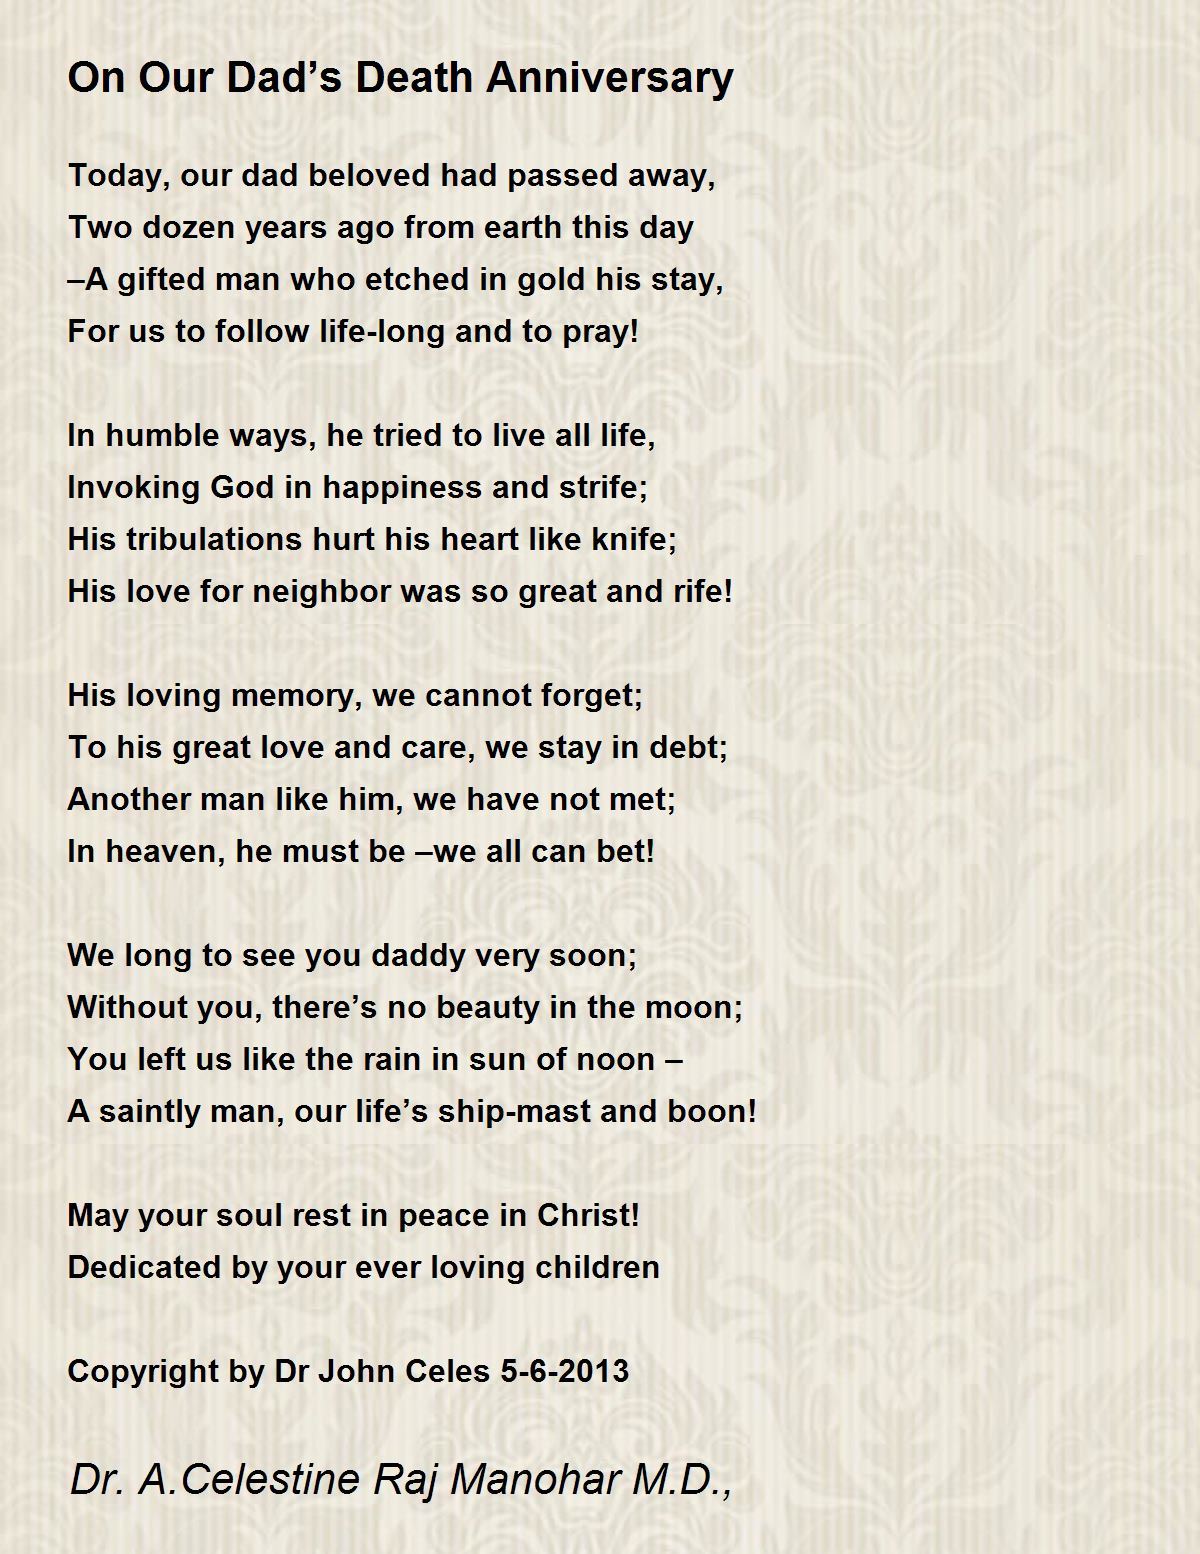 On Our Dad's Death Anniversary - On Our Dad's Death Anniversary Poem By Dr John Celes